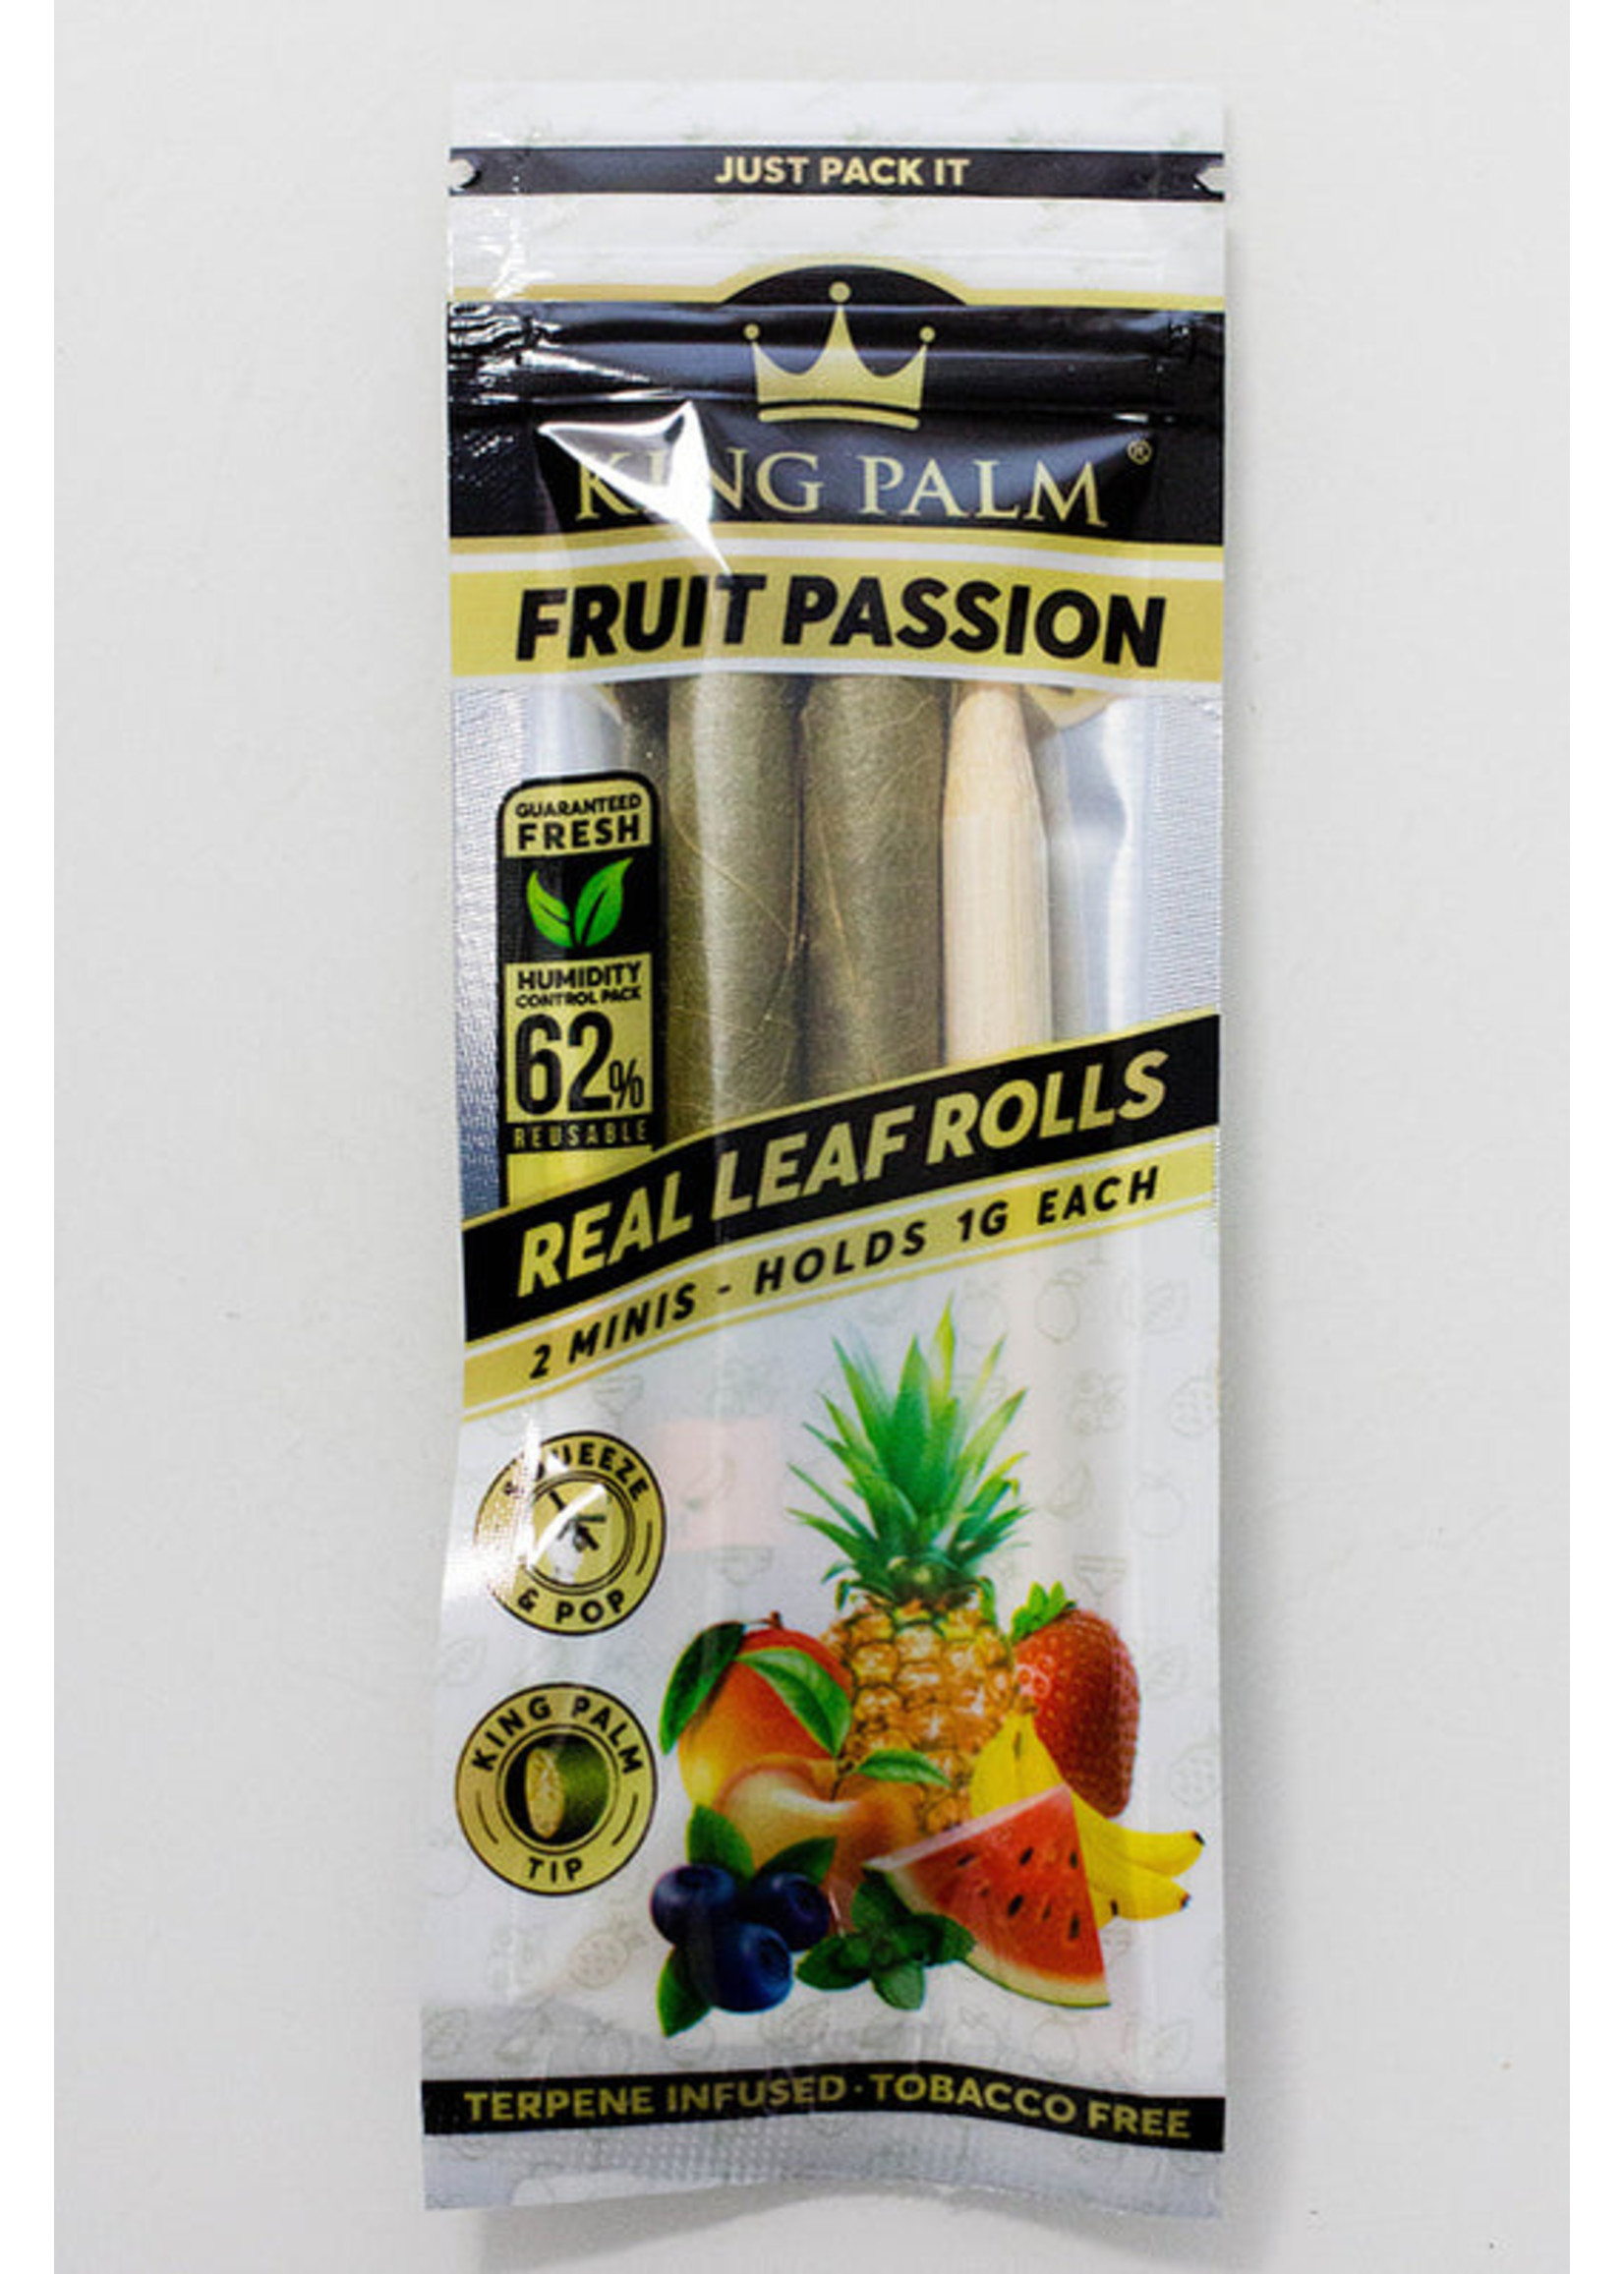 King Palm Hand-Rolled flavor Mini Leaf Fruit Passion